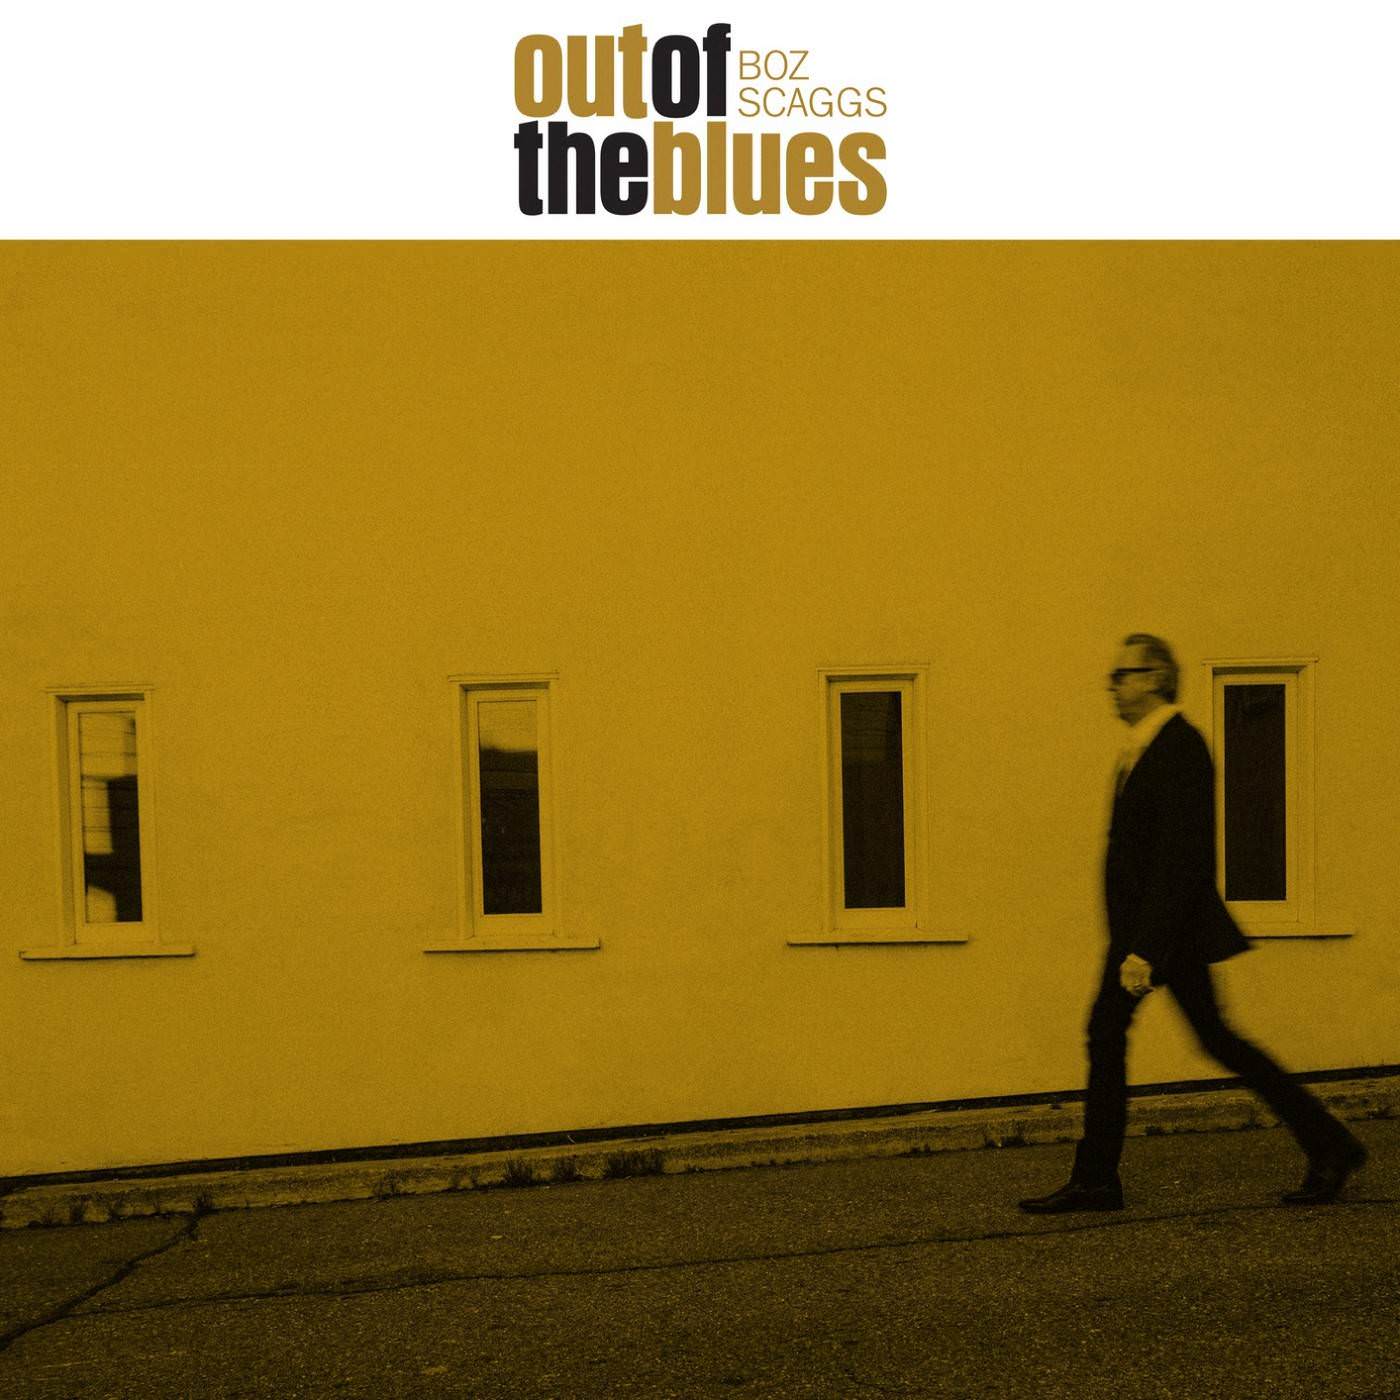 Boz Scaggs - Out of the Blues (2018) [FLAC 24bit/96kHz]